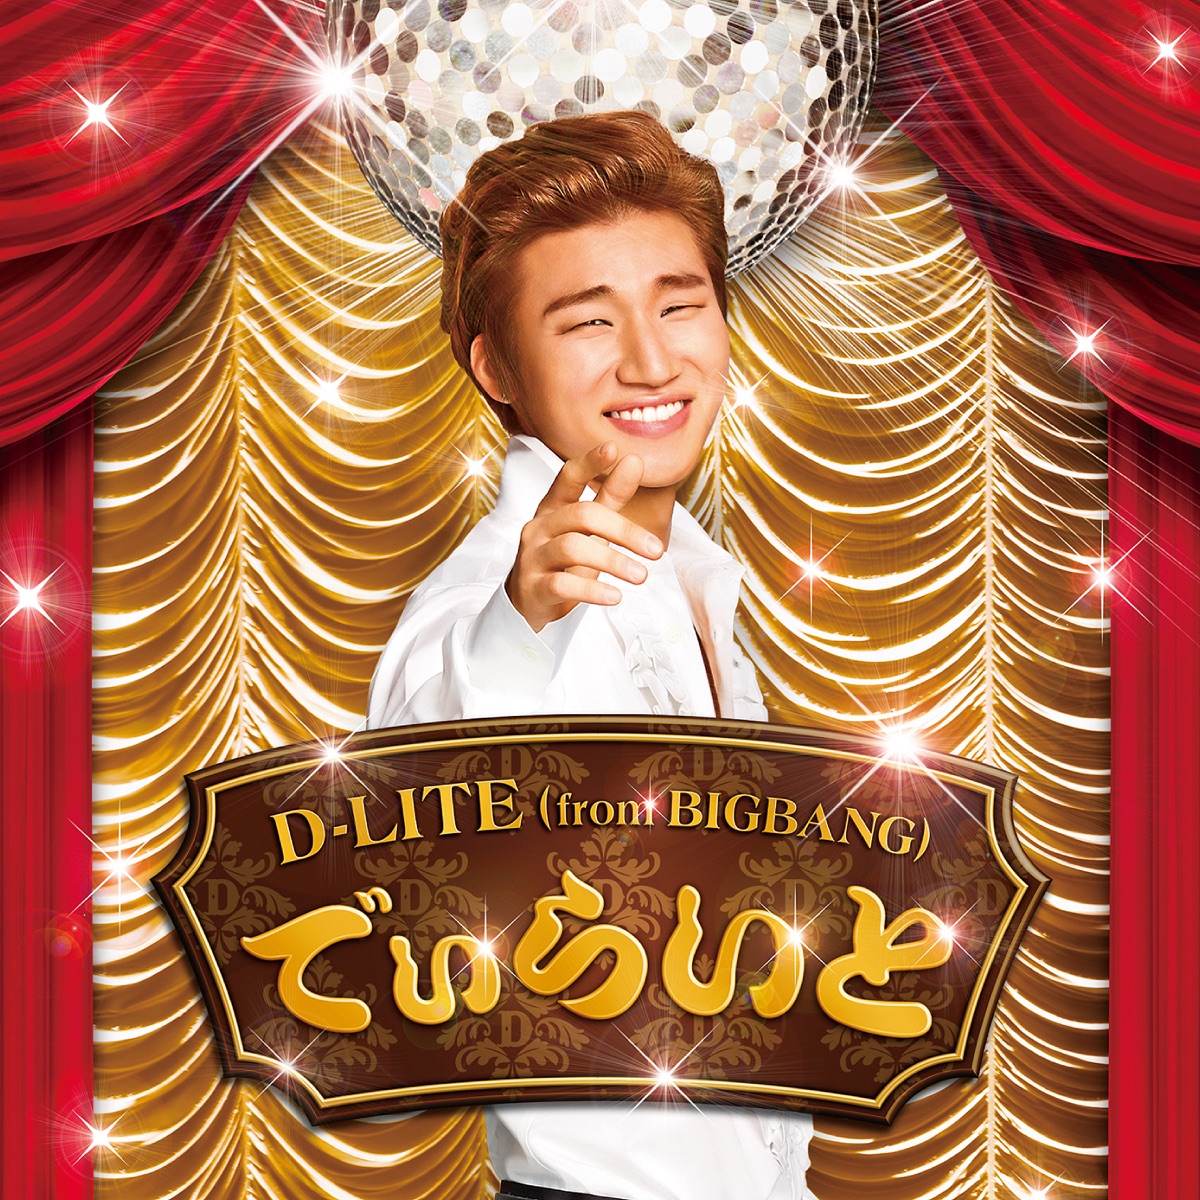 D'scover - Album by D-LITE (from BIGBANG) - Apple Music